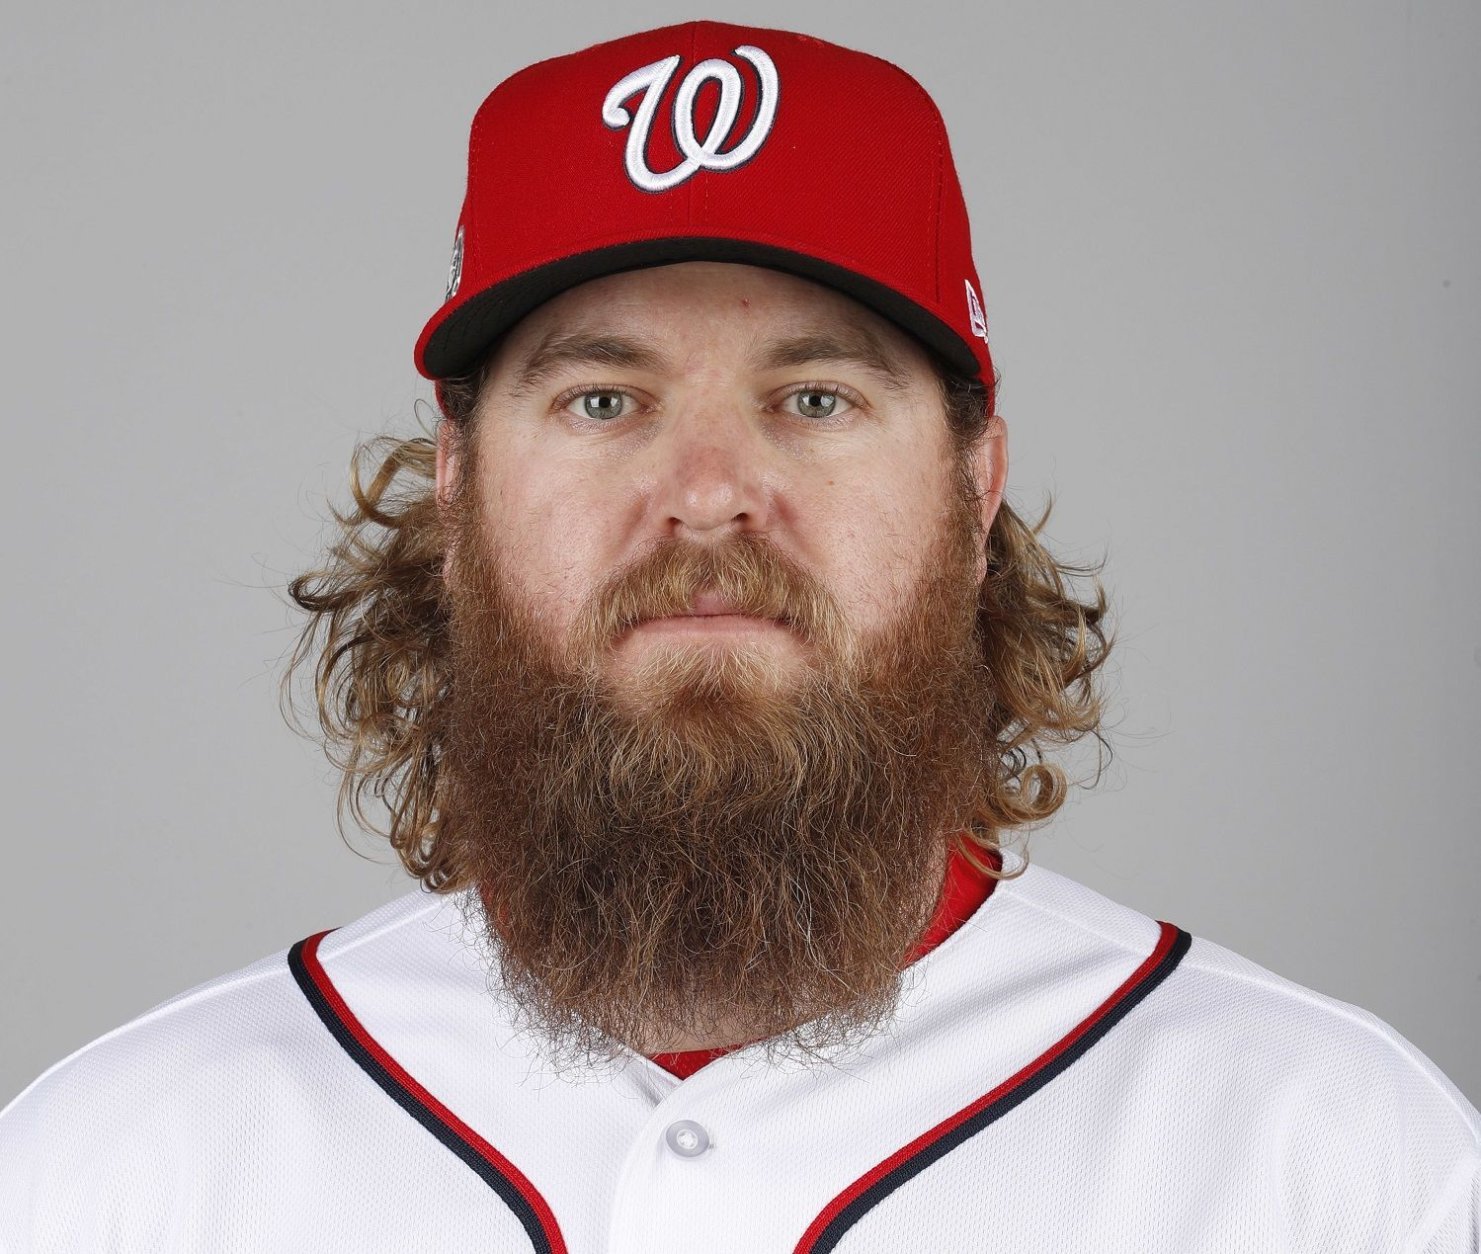 This is a 2018 photo of Shawn Kelley of the Washington Nationals baseball team. This image reflects the Nationals active roster as of Feb. 22, 2018 when this image was taken. (AP Photo/Jeff Roberson)